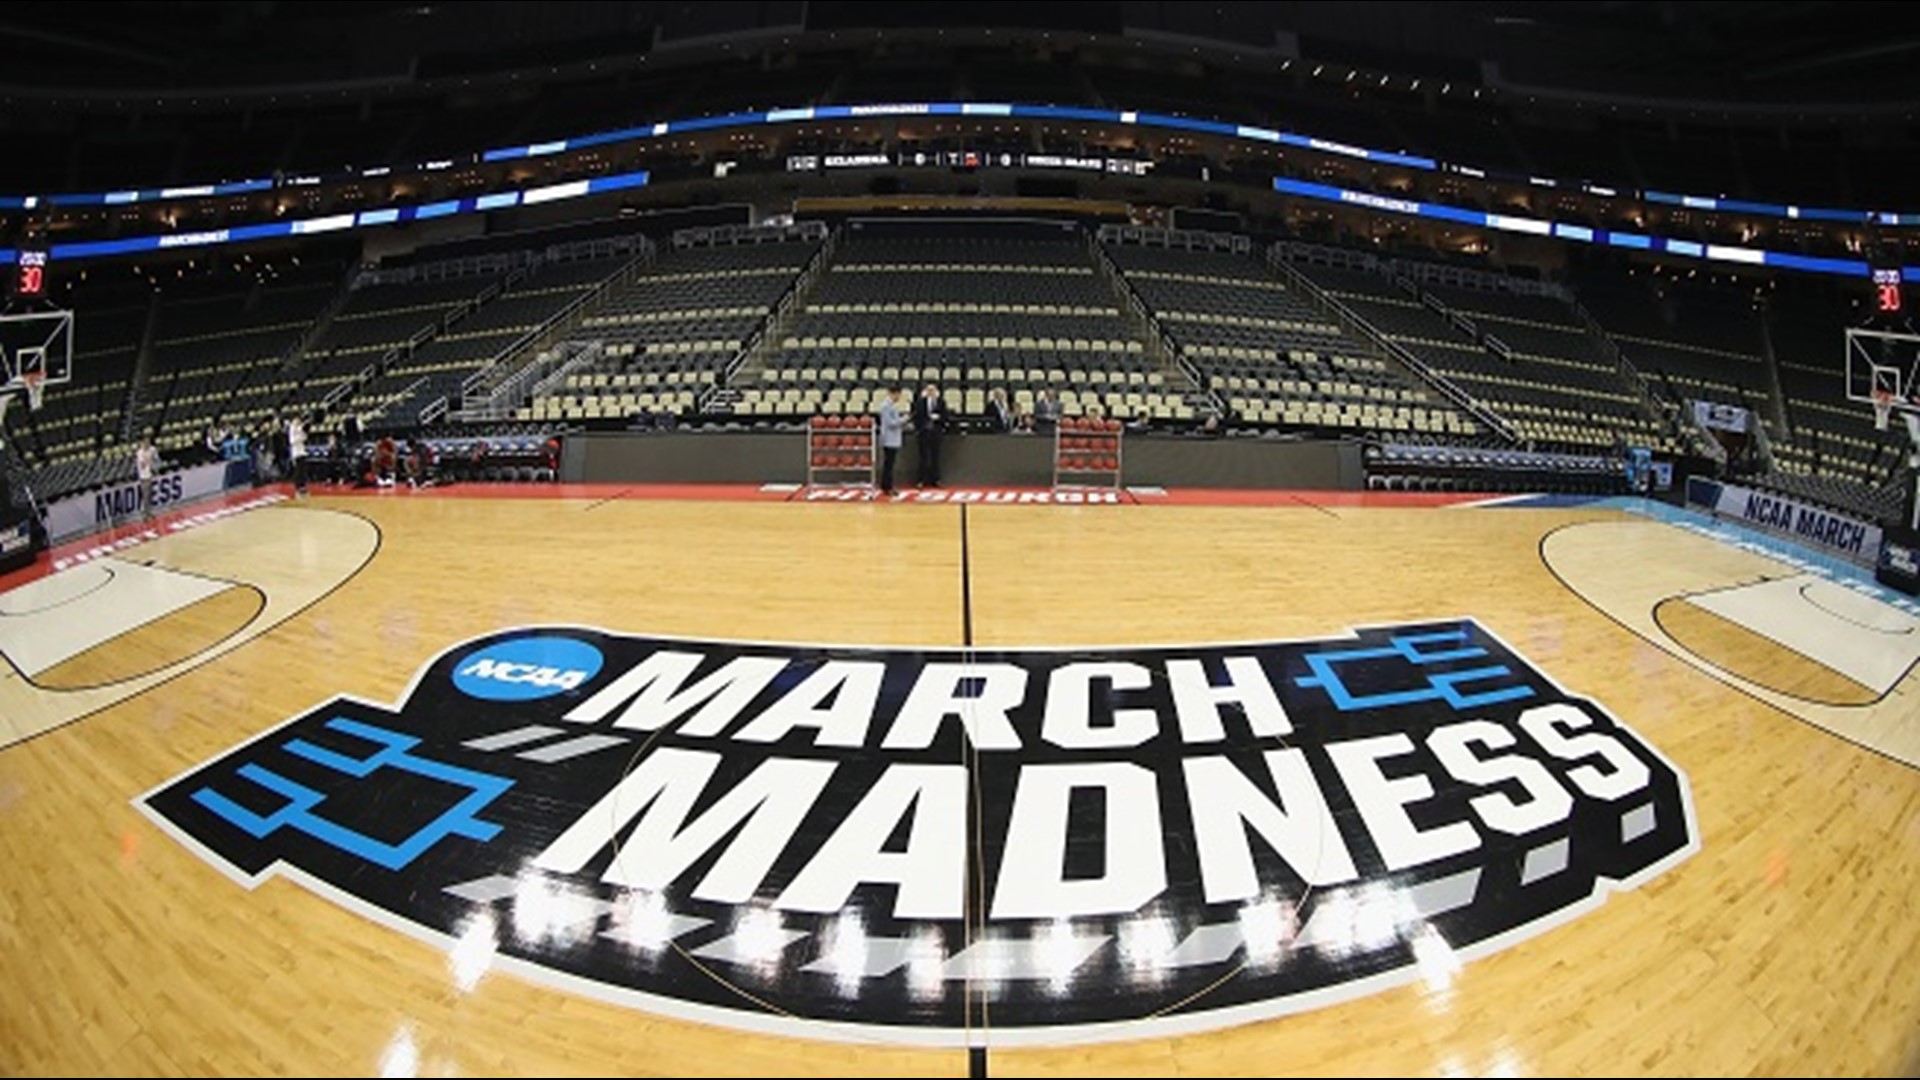 MARCH MADNESS Everything you need to know about the NCAA Tournament